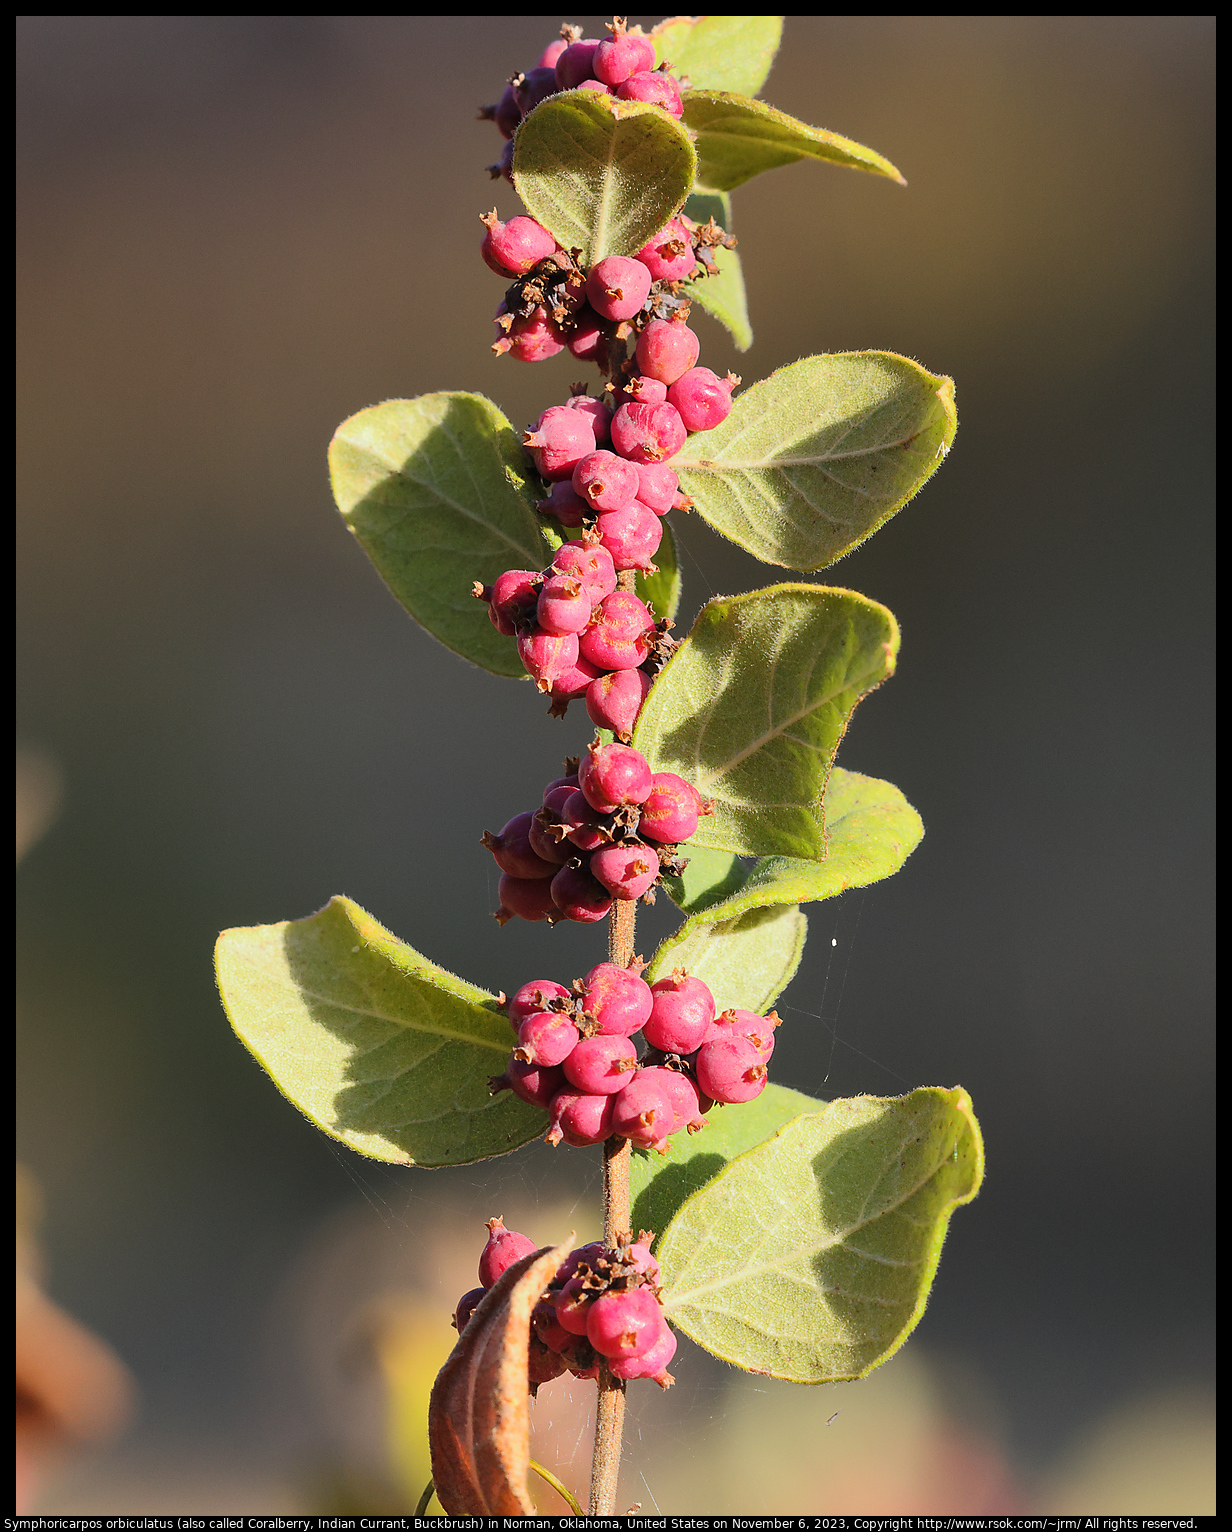 Symphoricarpos orbiculatus (also called Coralberry, Indian Currant, Buckbrush) in Norman, Oklahoma, United States on November 6, 2023